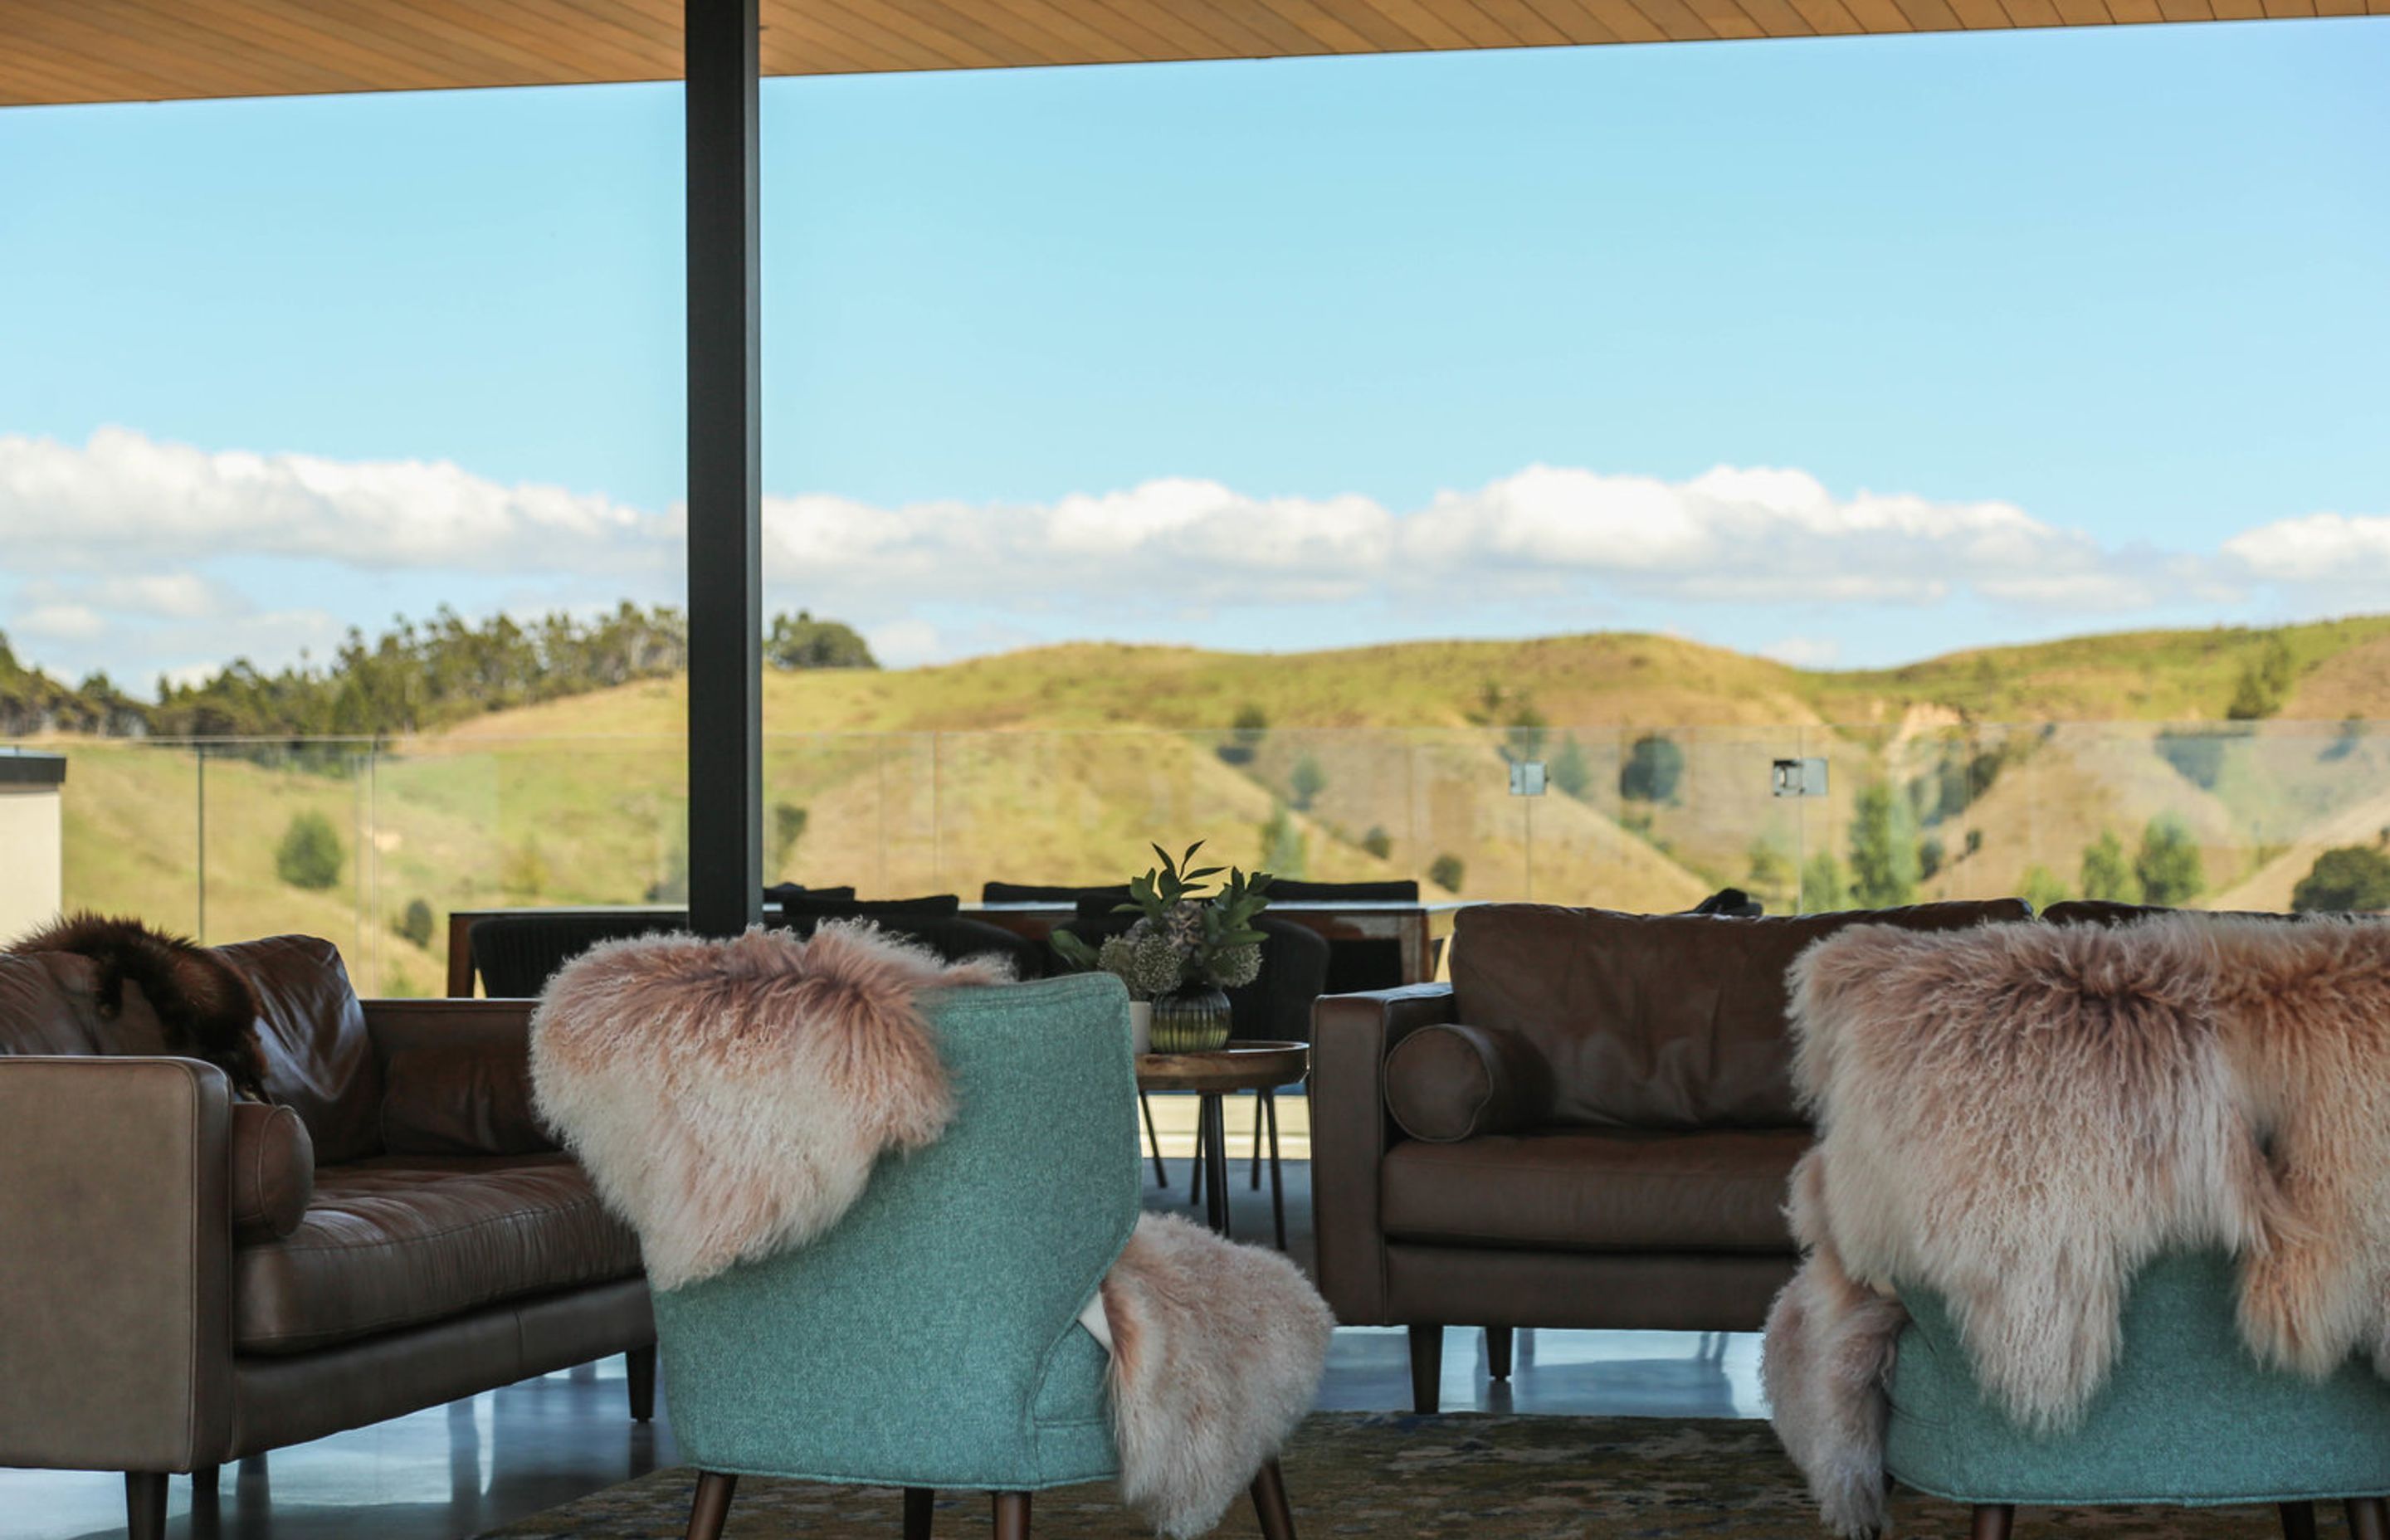 The cosy lounge area with a hillside backdrop.